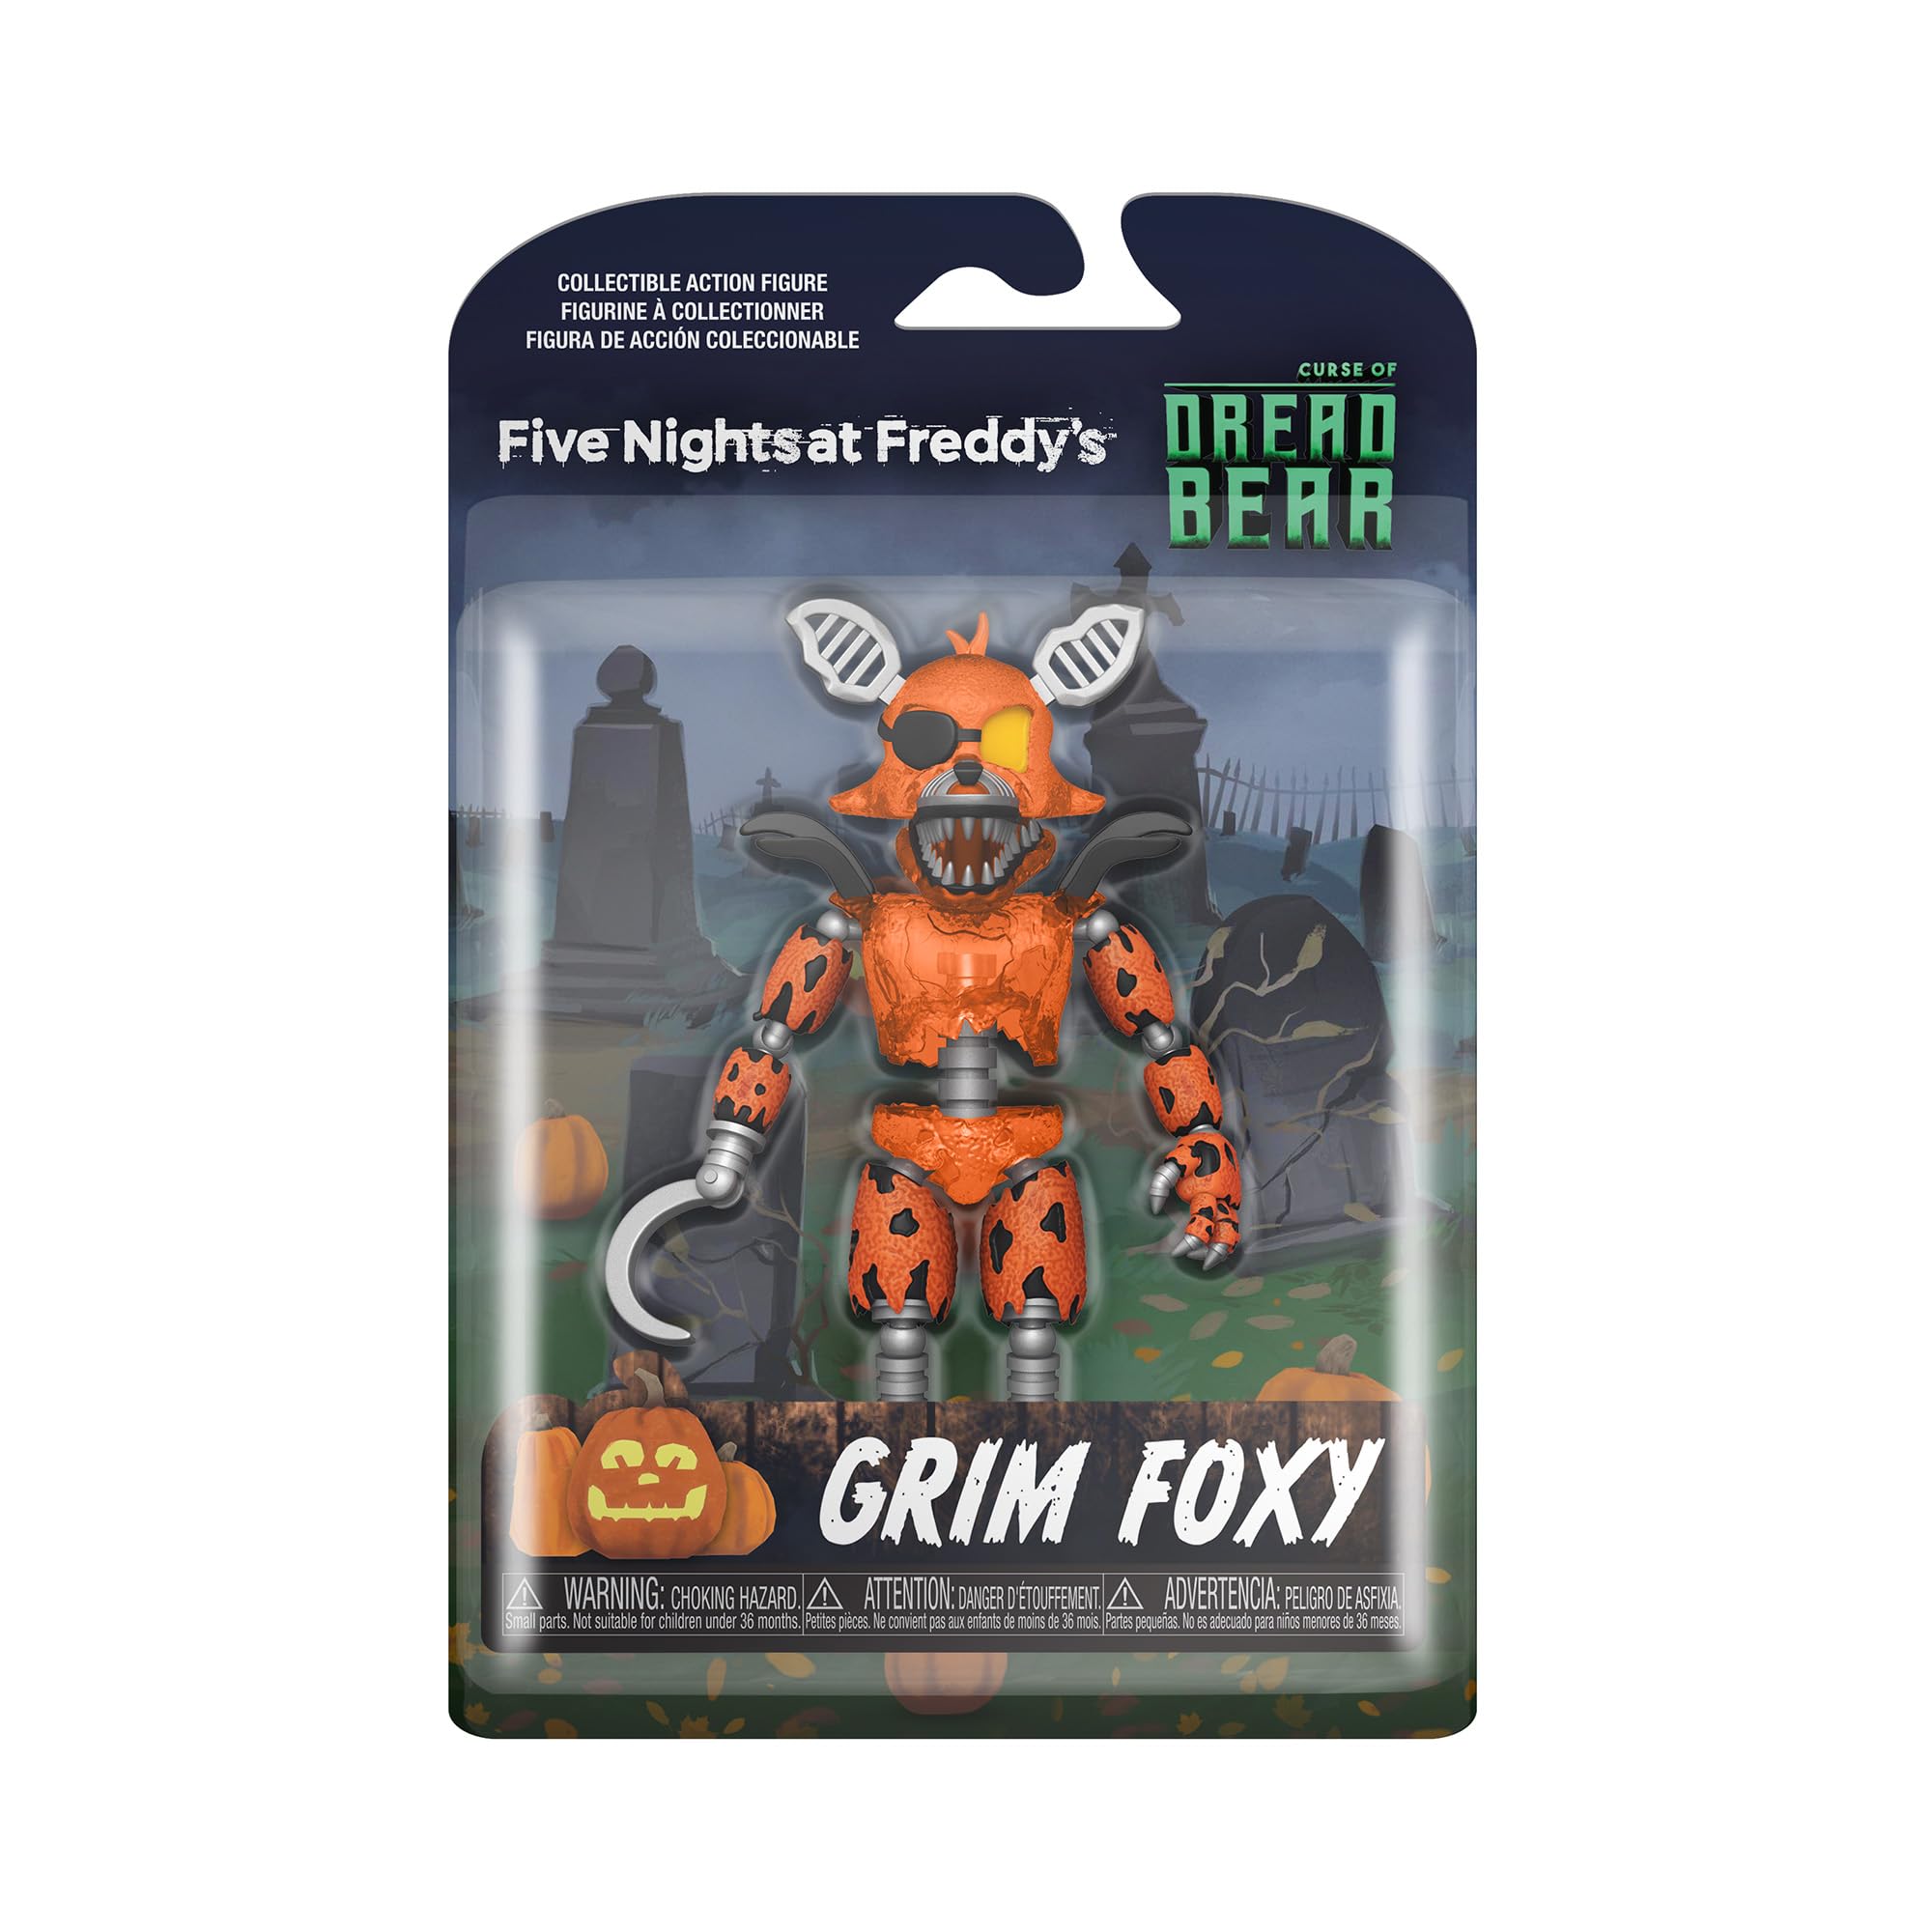 Funko Action Figure: Five Nights at Freddy's (FNAF) Dreadbear - Grim Foxy - Collectible - Gift Idea - Official Merchandise - for Boys, Girls, Kids & Adults - Video Games Fans